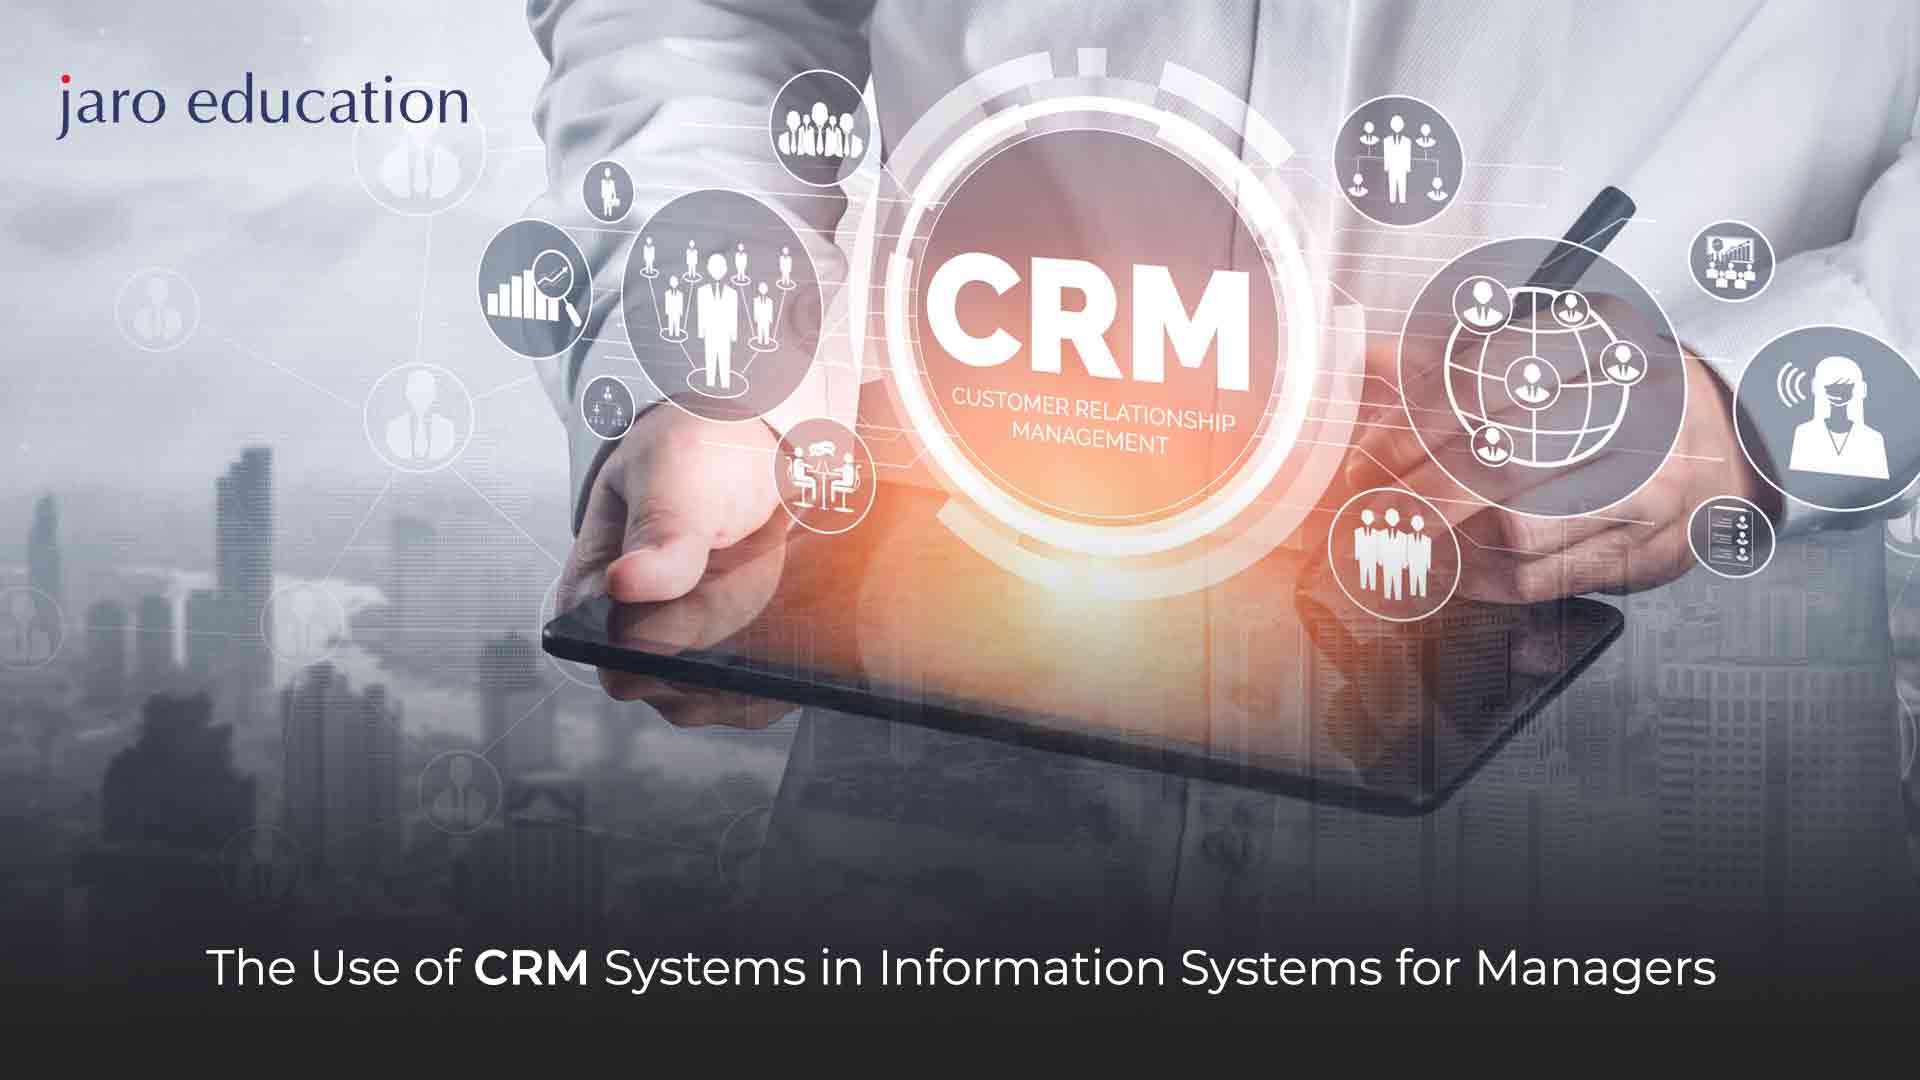 The-Use-of-CRM-Systems-in-Information-Systems-for-Managers - jaro